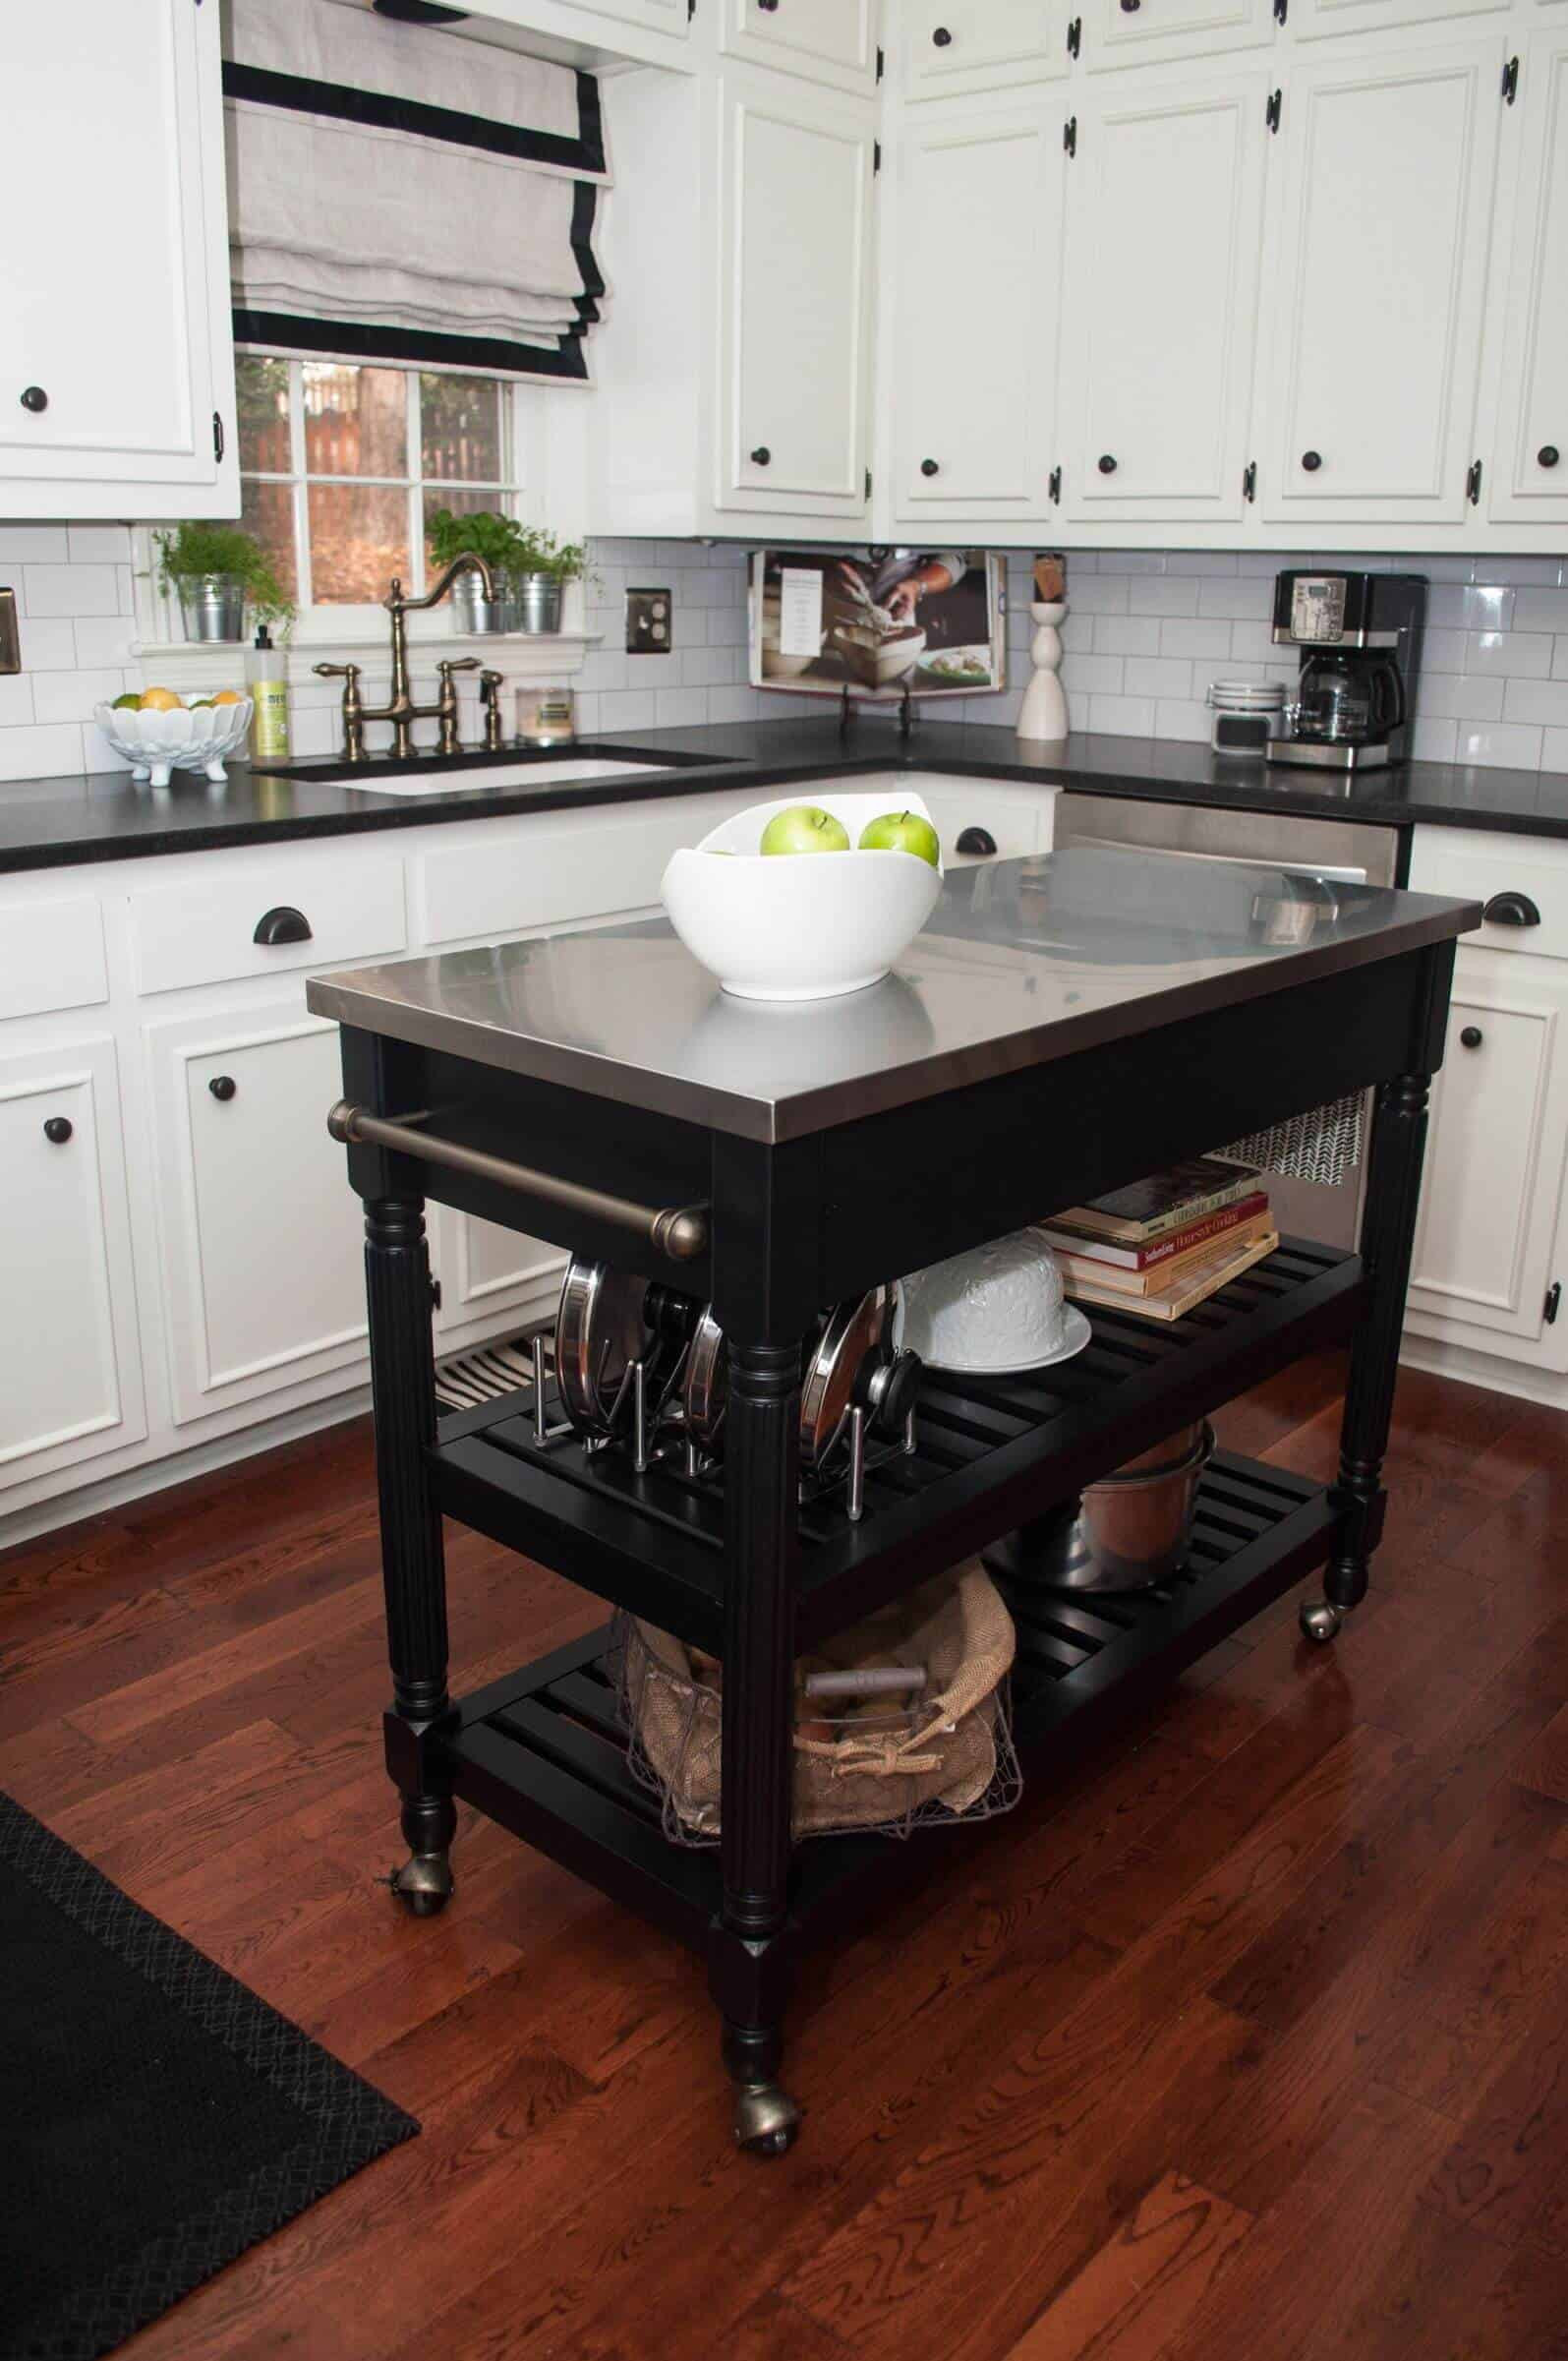 Small Kitchen Island On Wheels
 20 Clever Small Island Ideas for Your Kitchen s